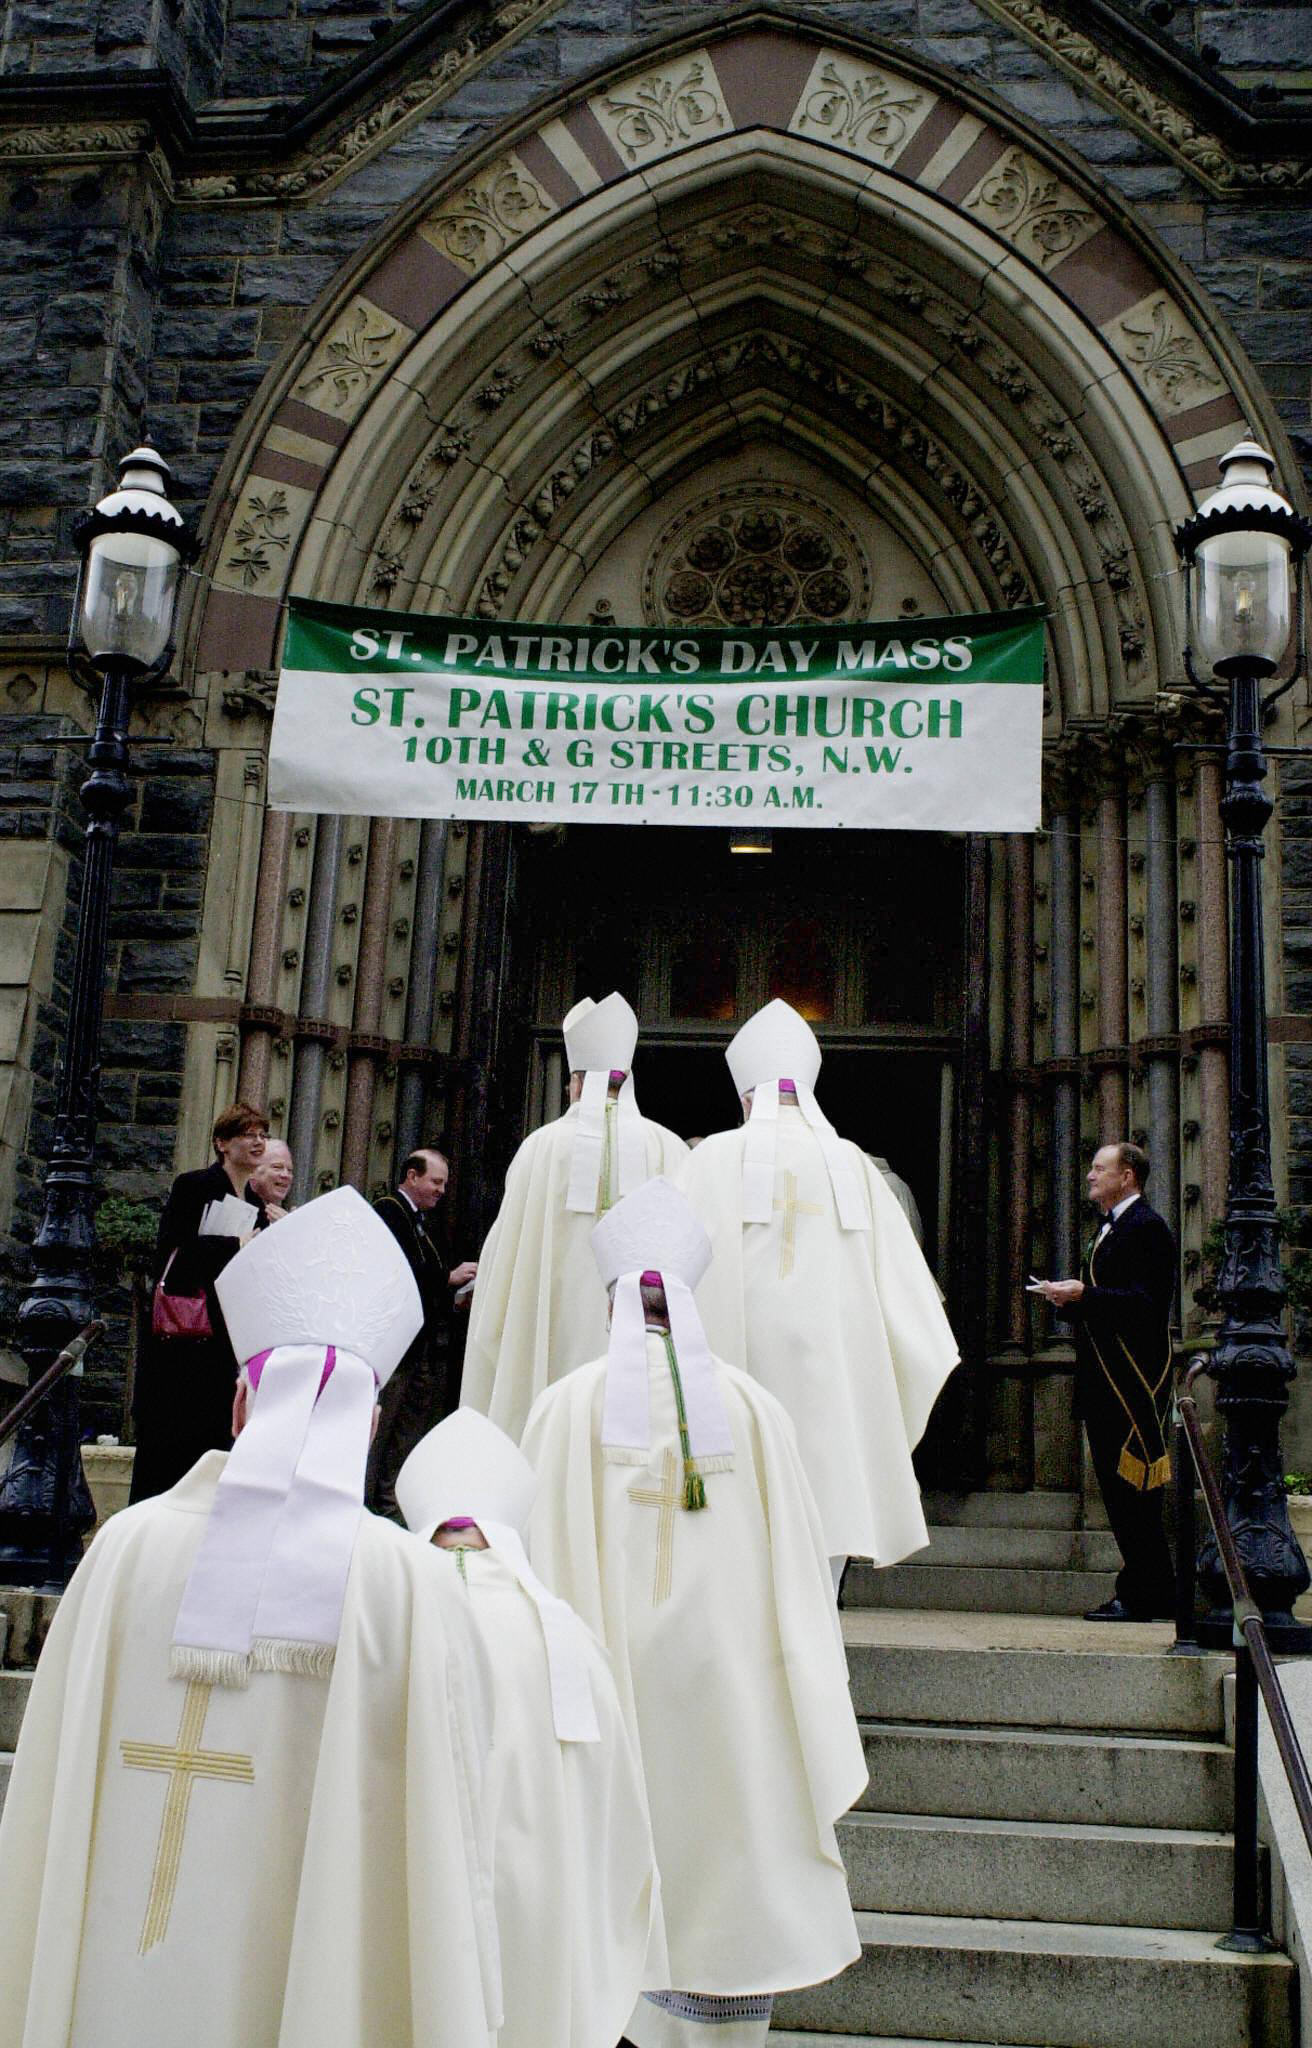 St. Patrick's Day mass is celebrated at the Church of St. Patrick March 17, 2004 in Washington, DC. (Getty)